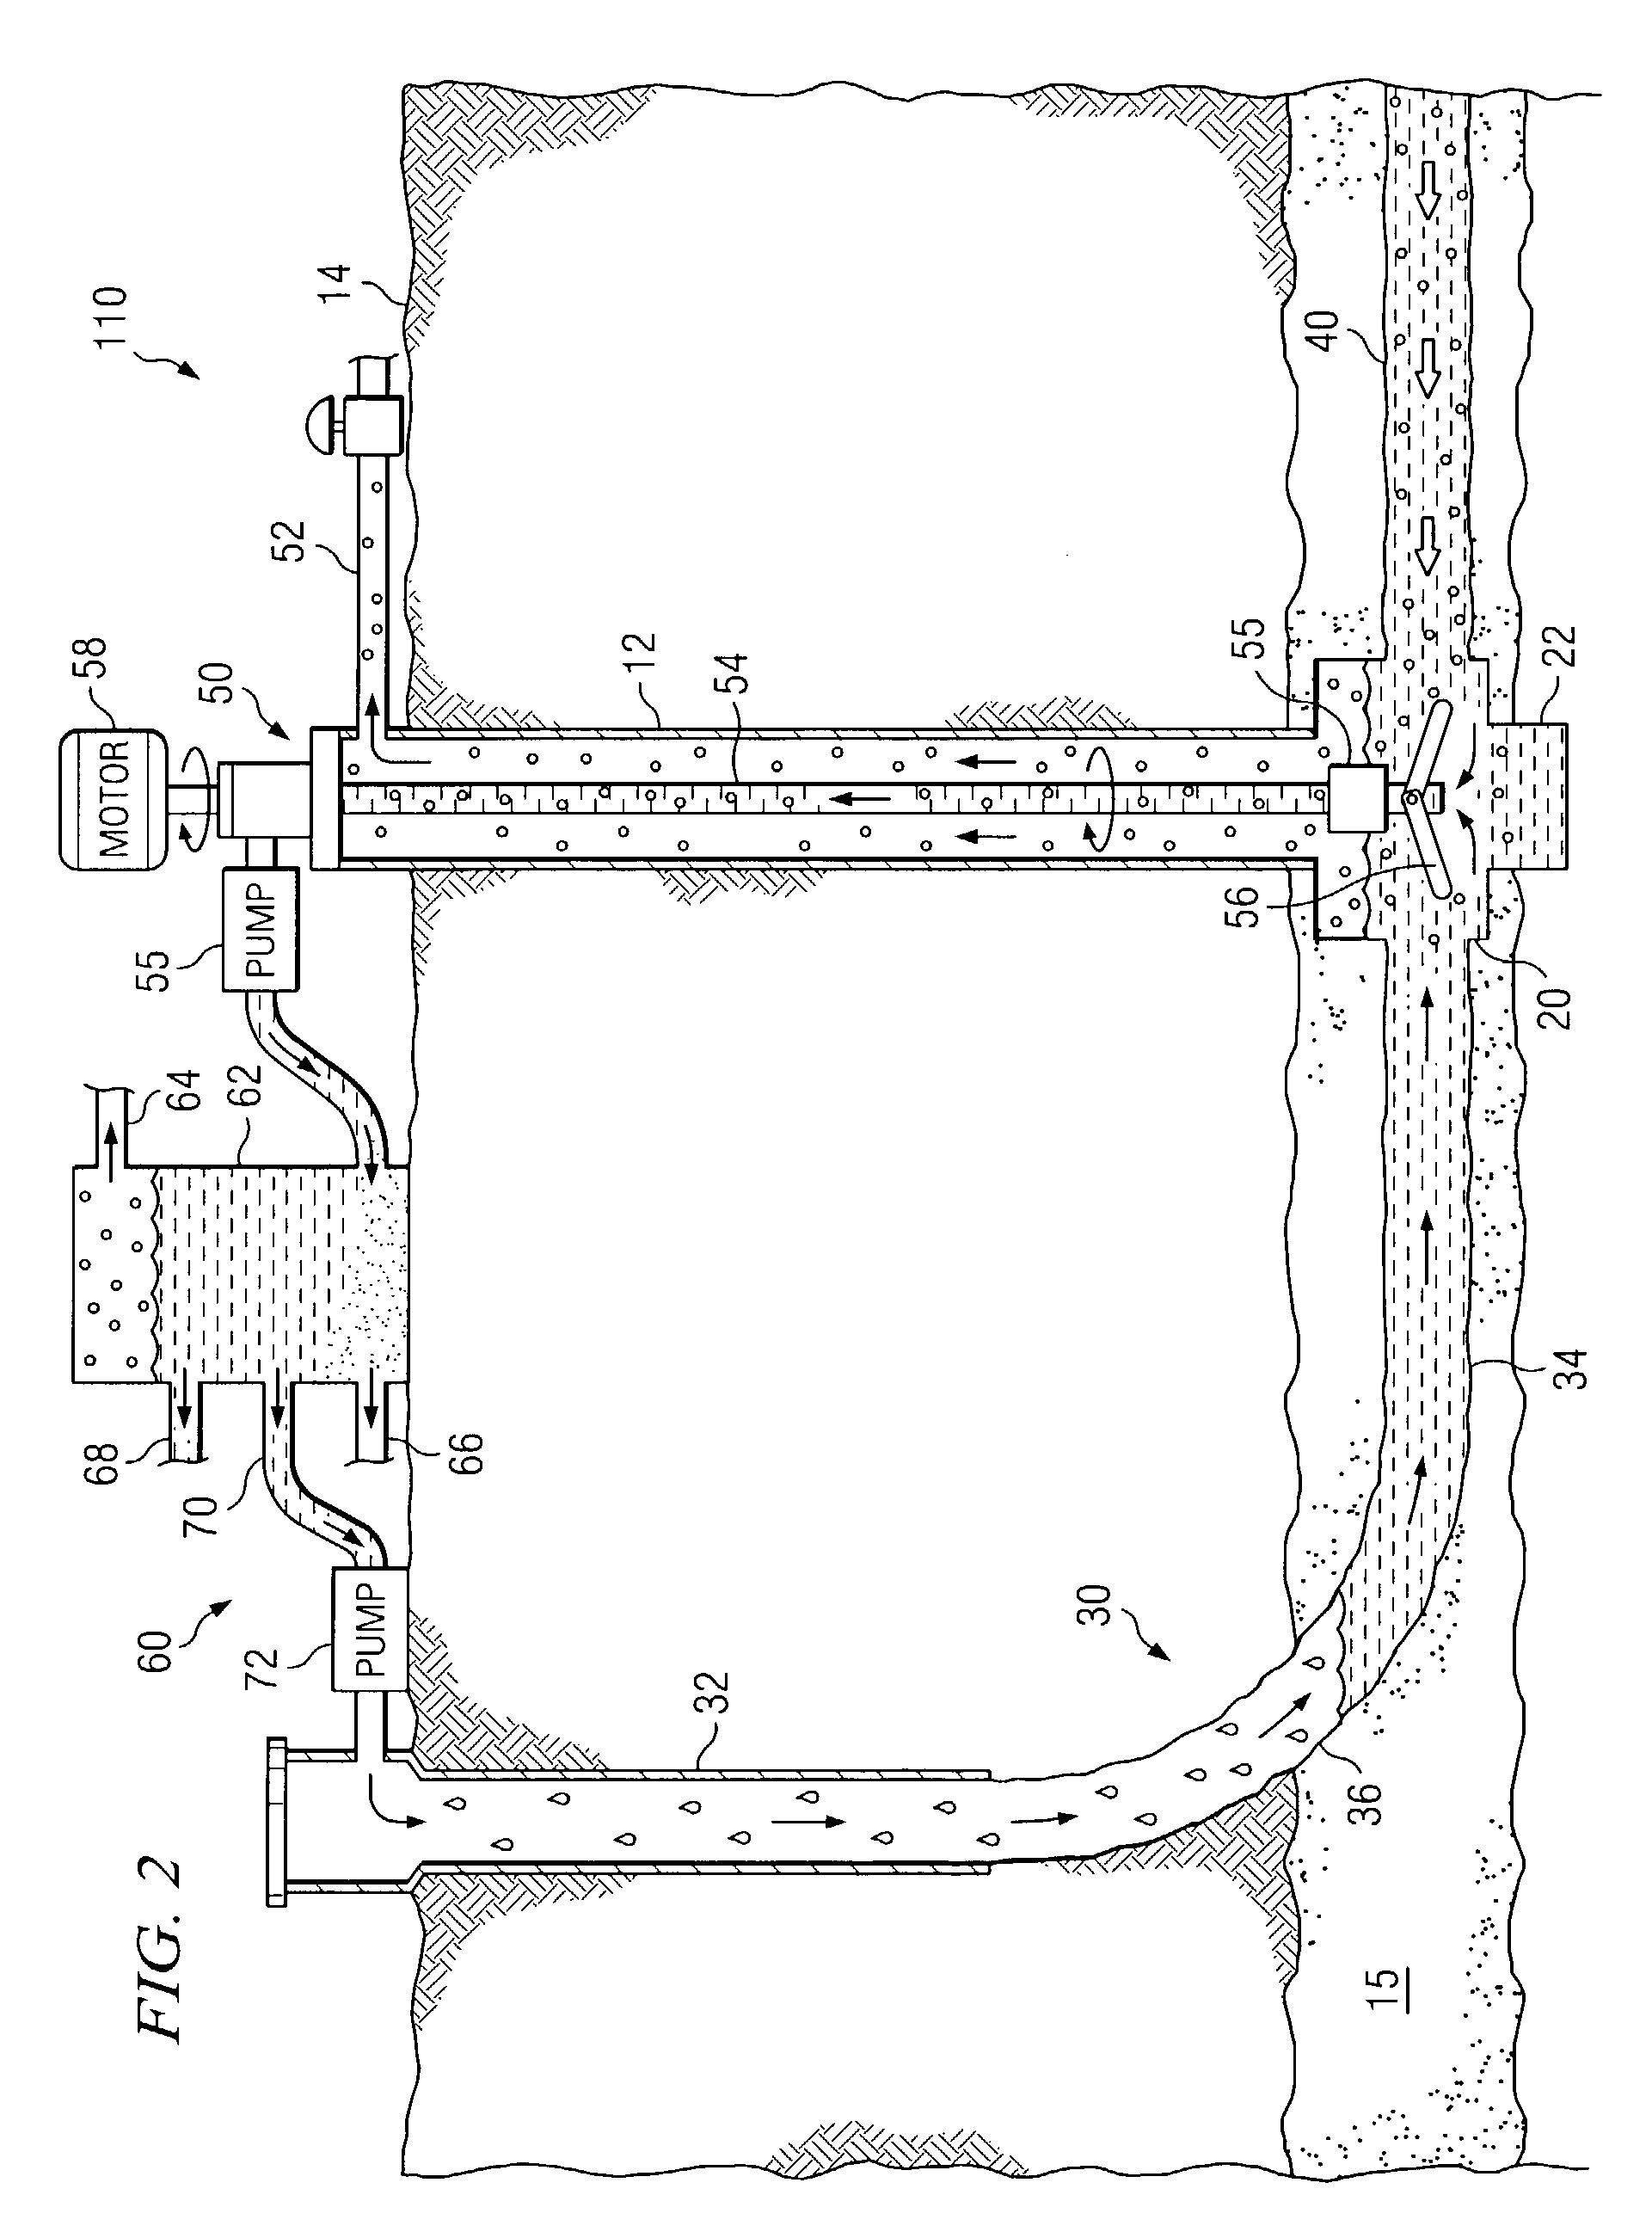 Method and system for recirculating fluid in a well system